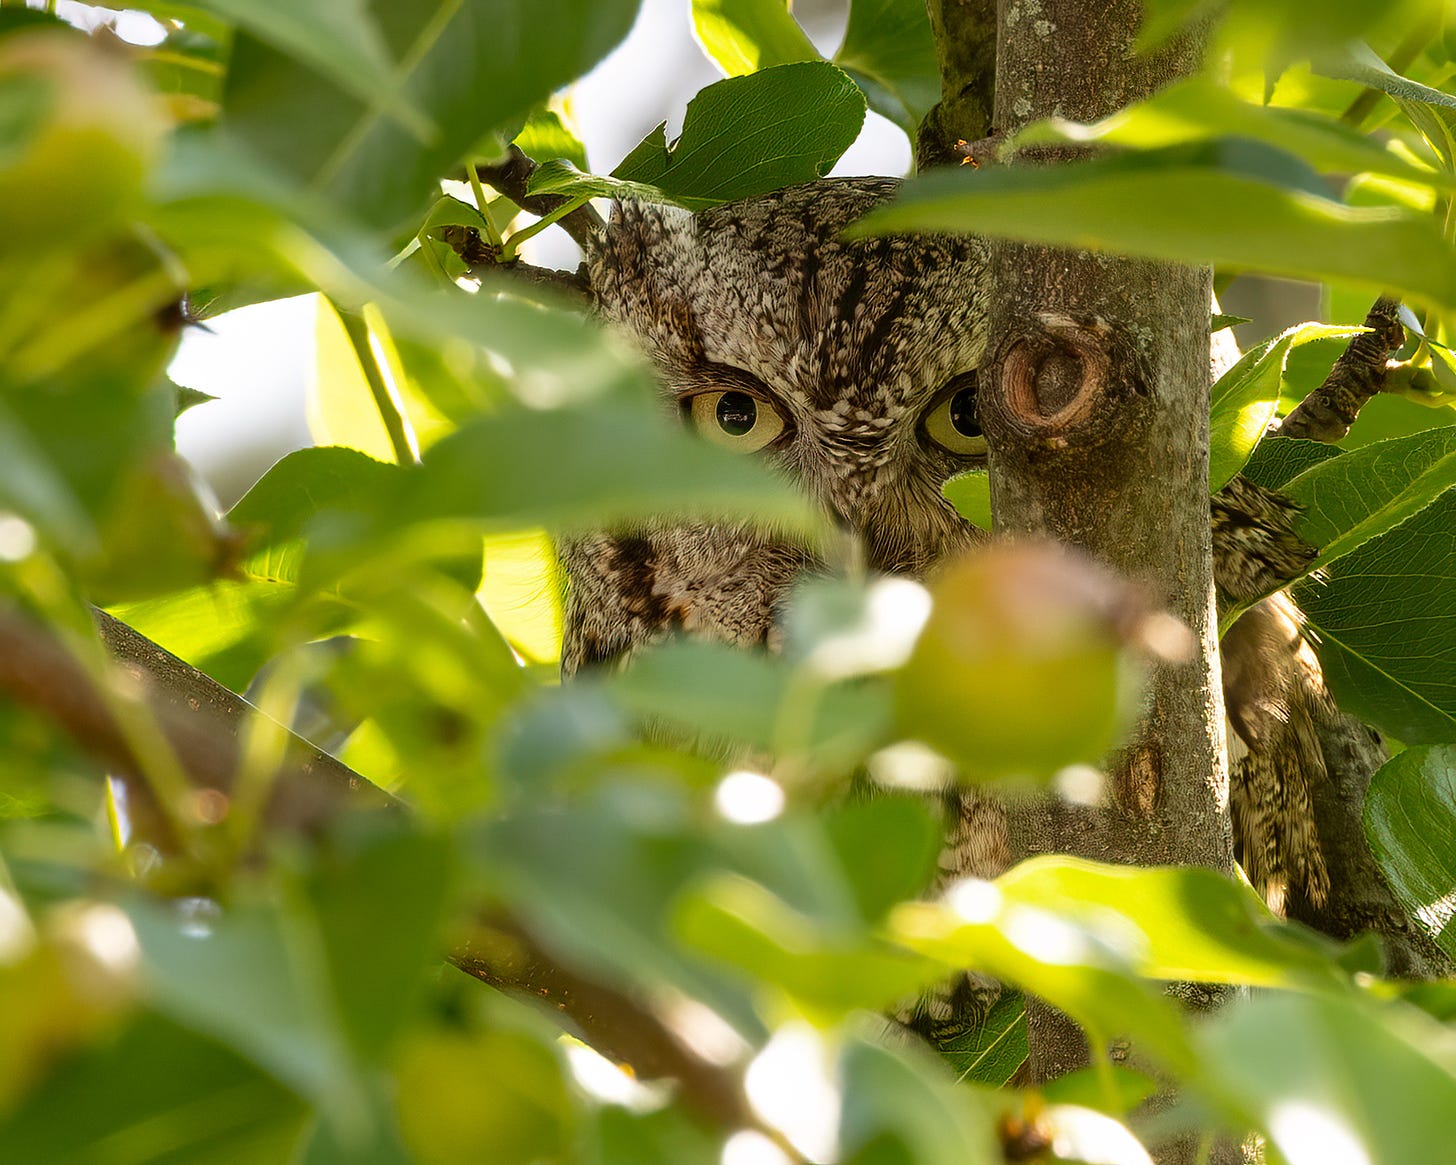 In this photo, the male screech owl peers out from behind a bunch of leaves. The narrow trunk of the pear tree partially obscures his face. He has big yellow eyes and is looking straight at the photographer.